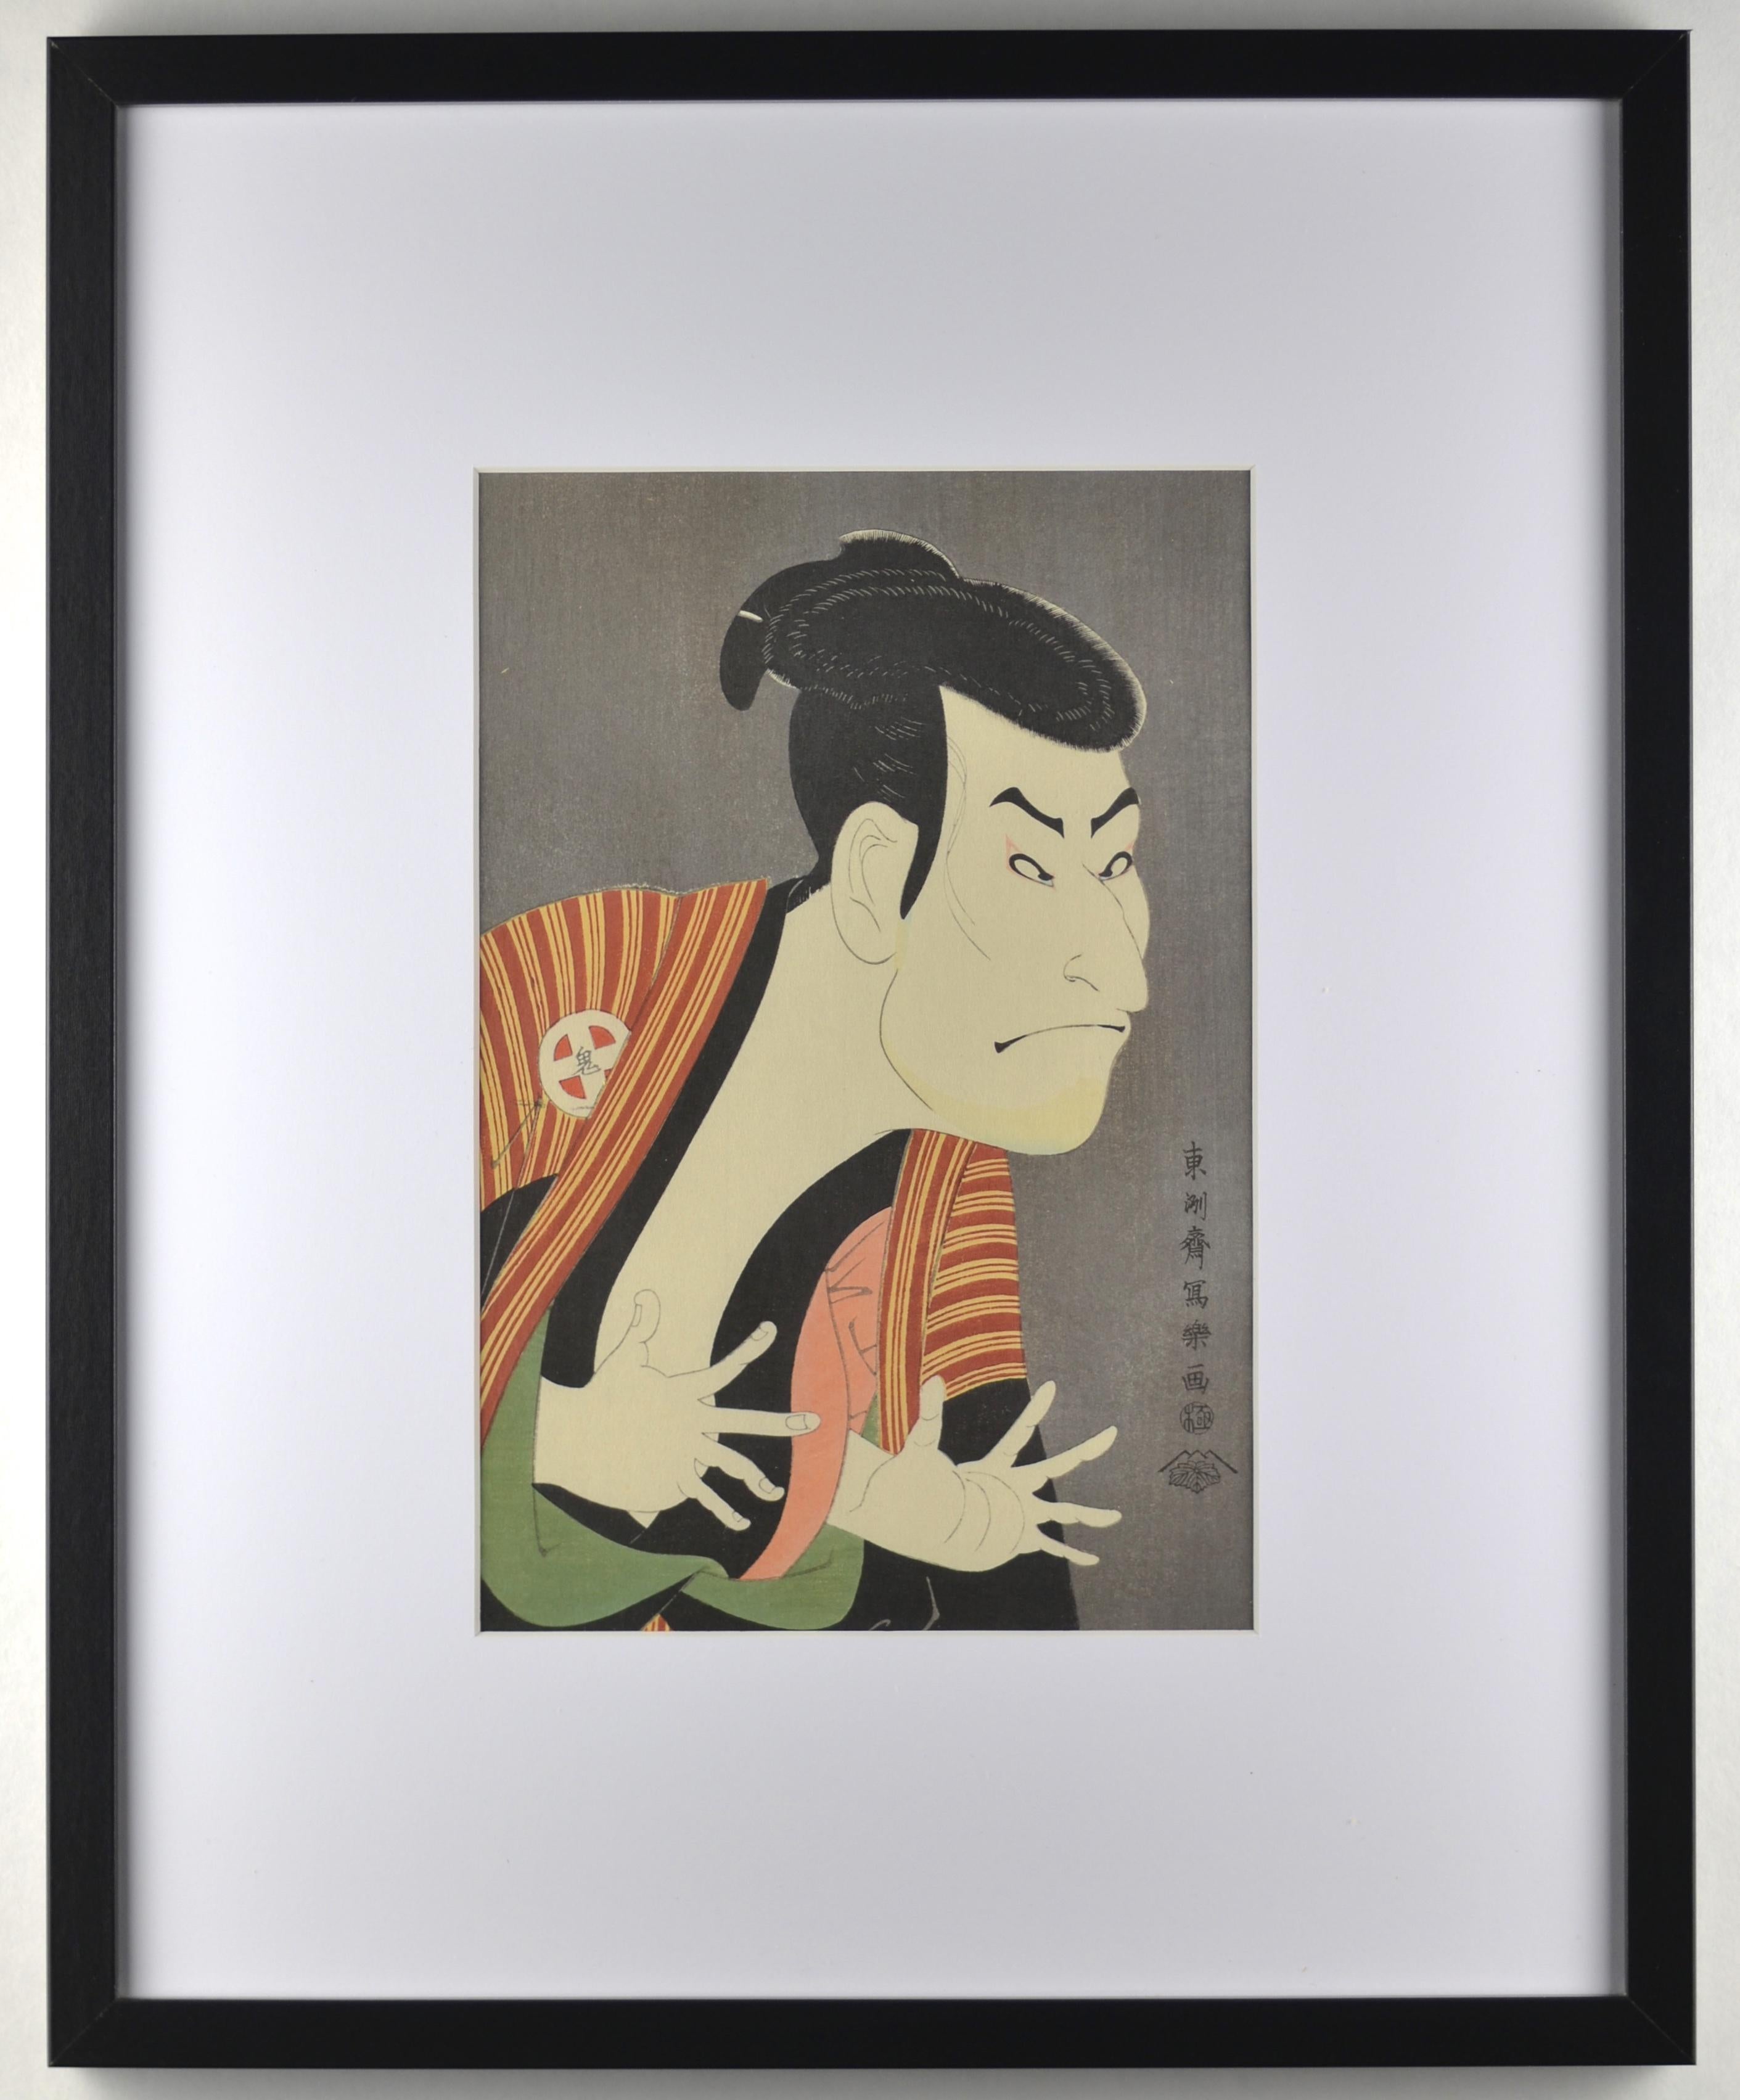 This offer includes a real fine woodblock print from circa 1960 after Toshusai Sharaku's famous series of actors. The series, originally published between 1794-1795, marks the height of actor portraits (yakusha-e) in Japanese woodblock printing.